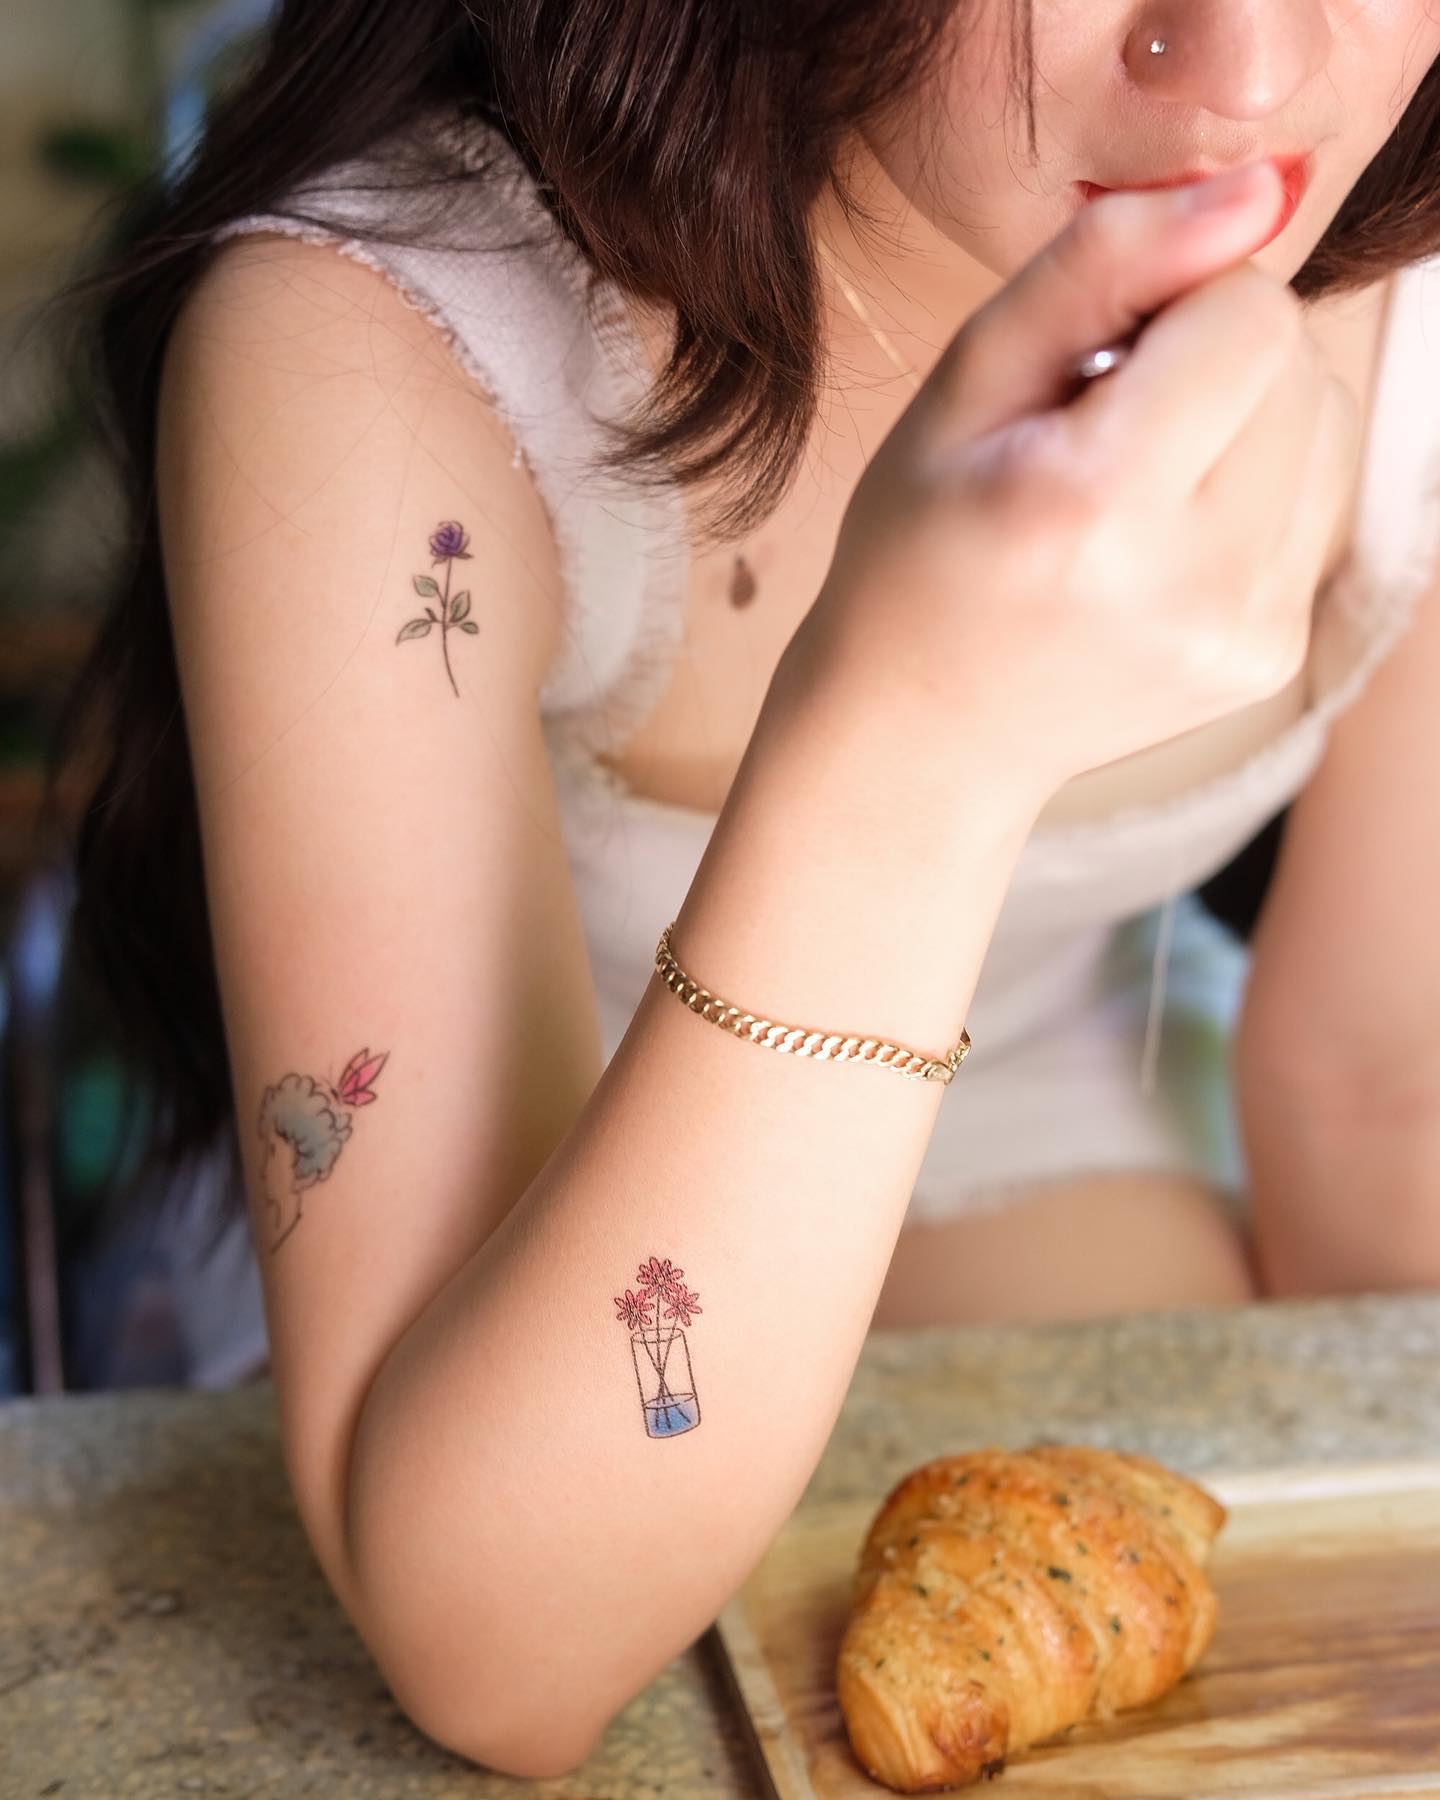 girl with temporary tattoos on arm